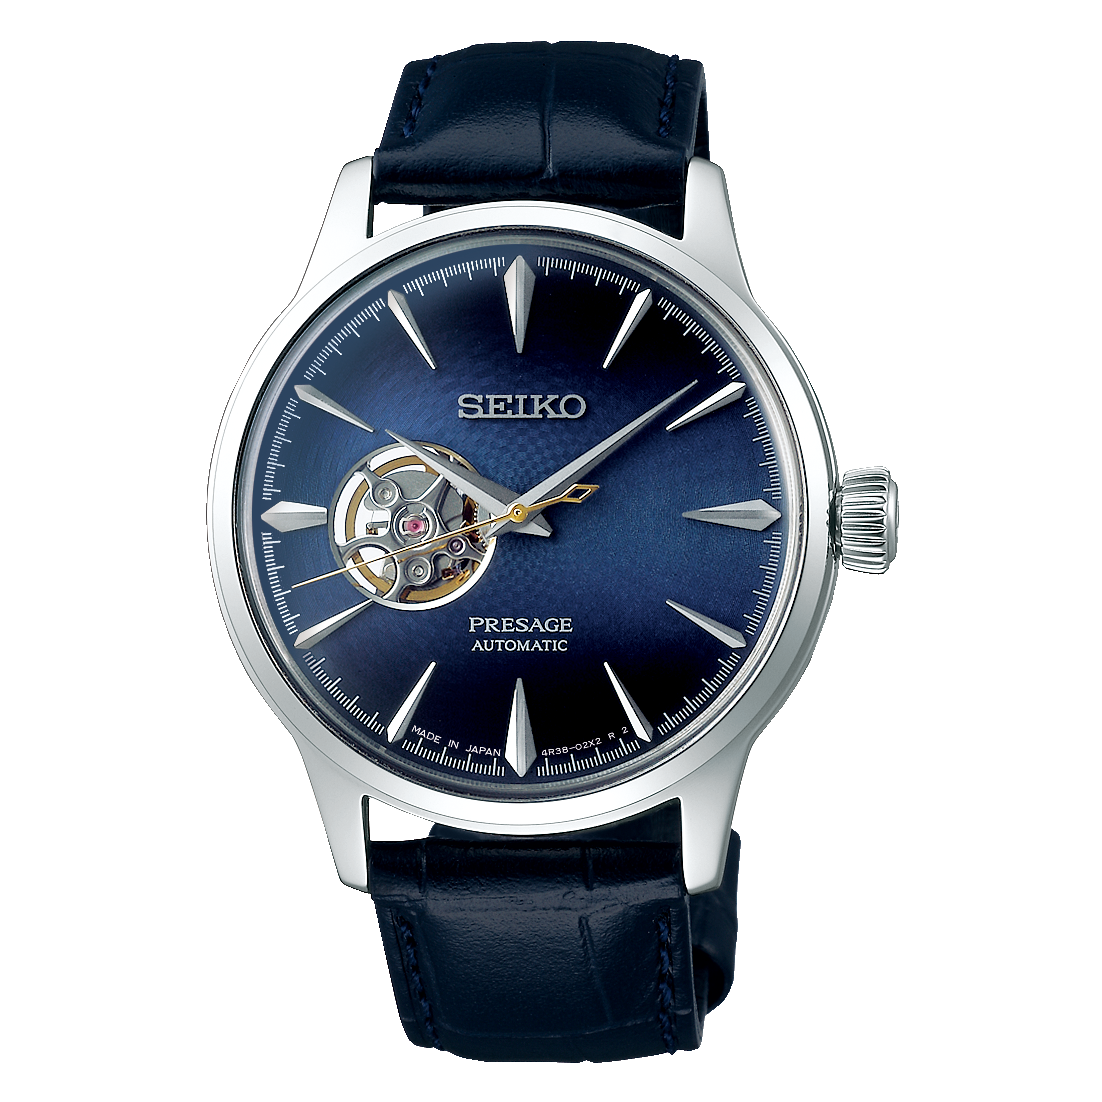 BNIB Seiko Presage Cocktail Time Blue Moon Open Heart SARY155 SSA405J1  SSA405J SSA405 Made in Japan Blue Dial Leather Strap Men Watch (Preorder) |  Lazada Singapore